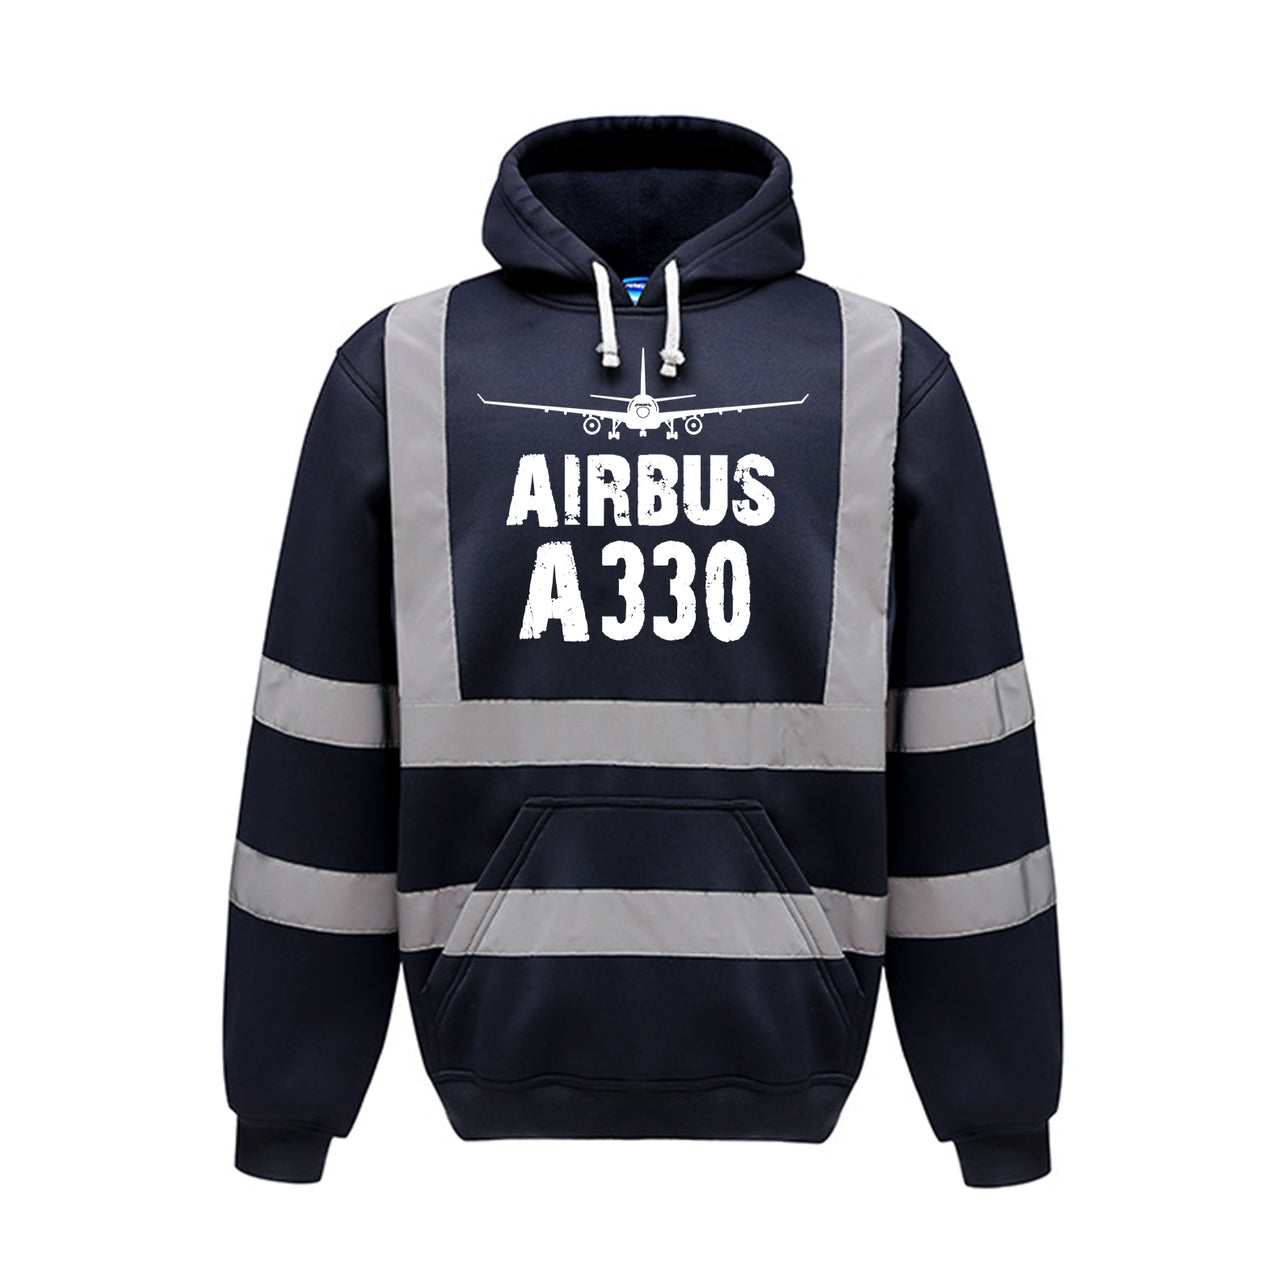 Airbus A330 & Plane Designed Reflective Hoodies